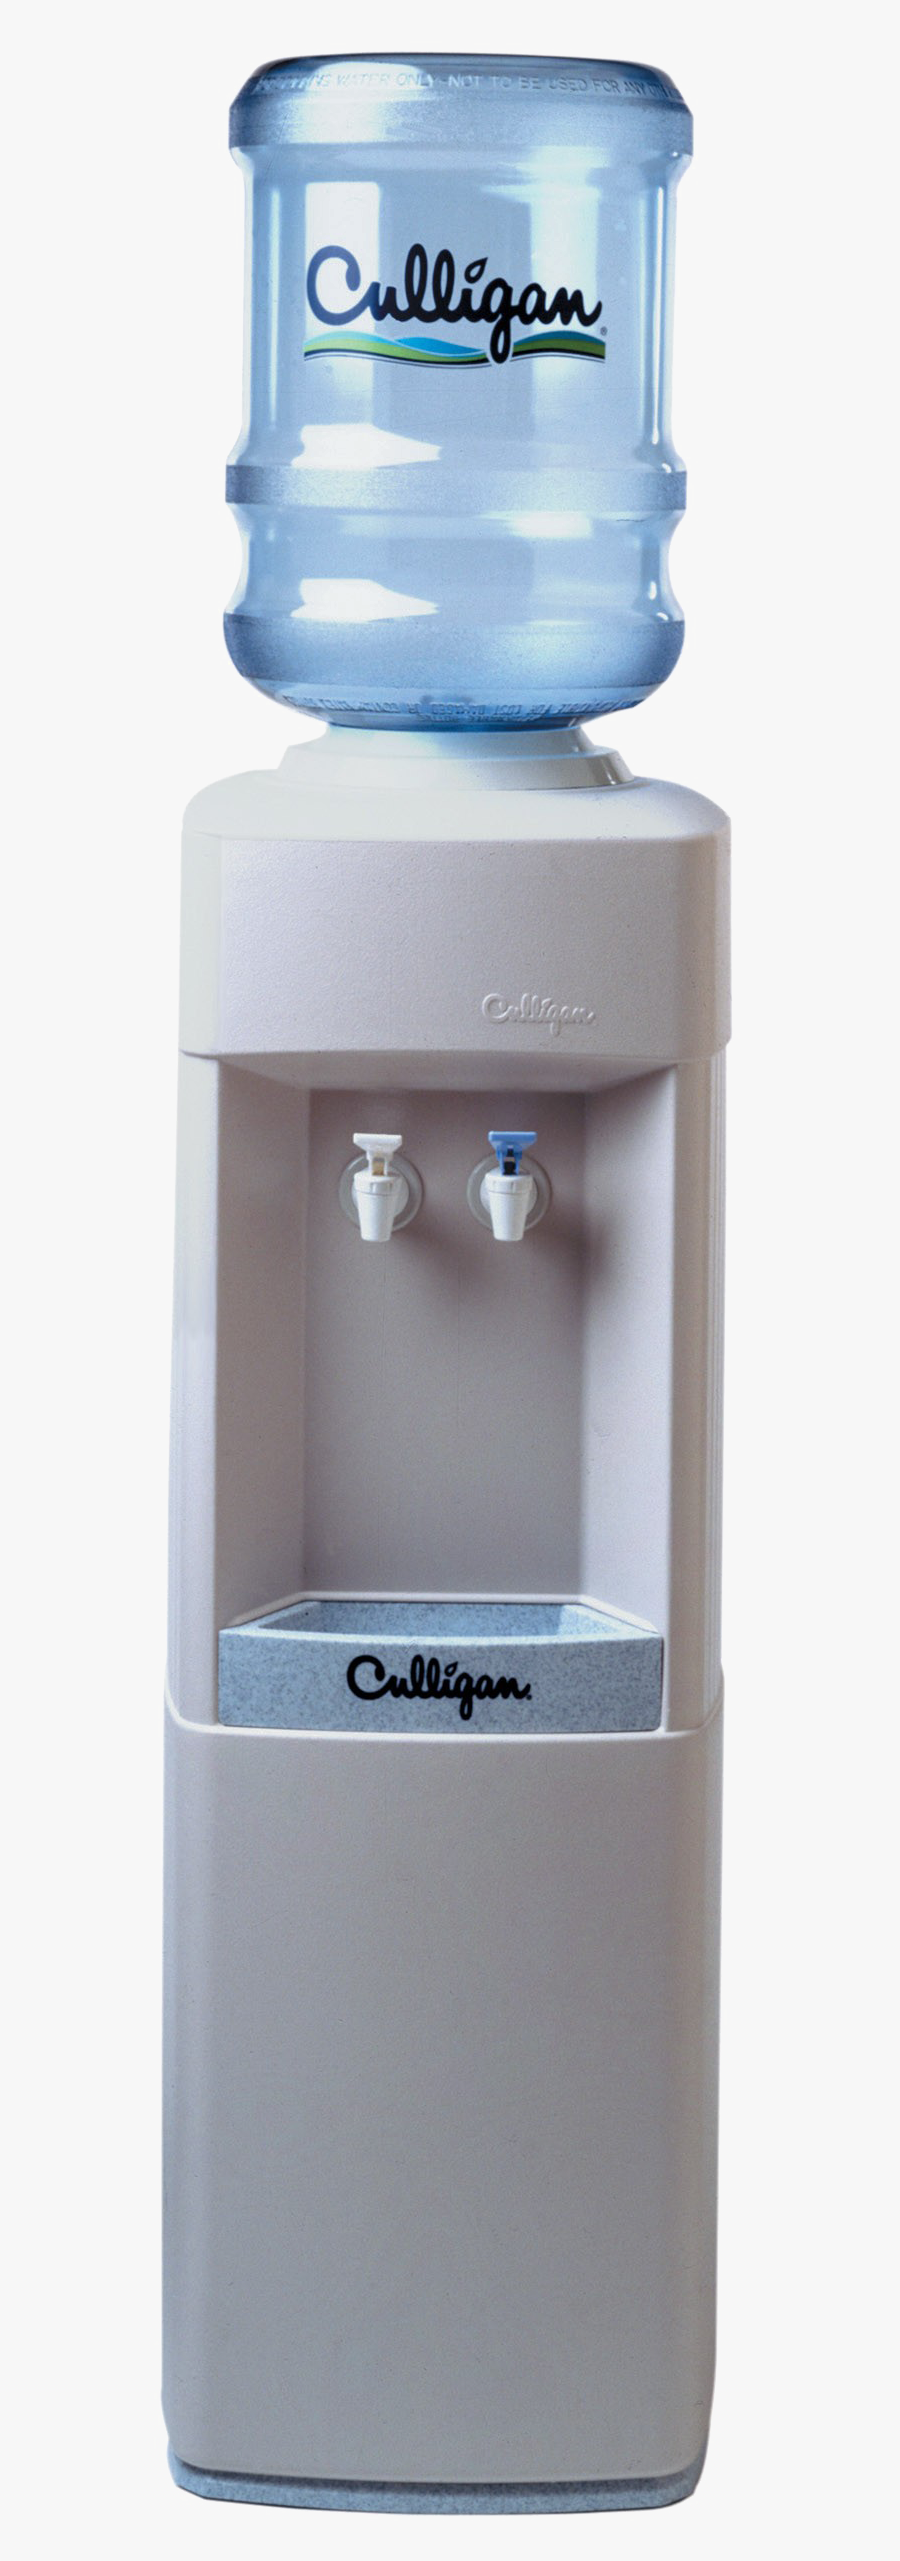 Water Cooler Png Free Download - Culligan Water Cooler, Transparent Clipart